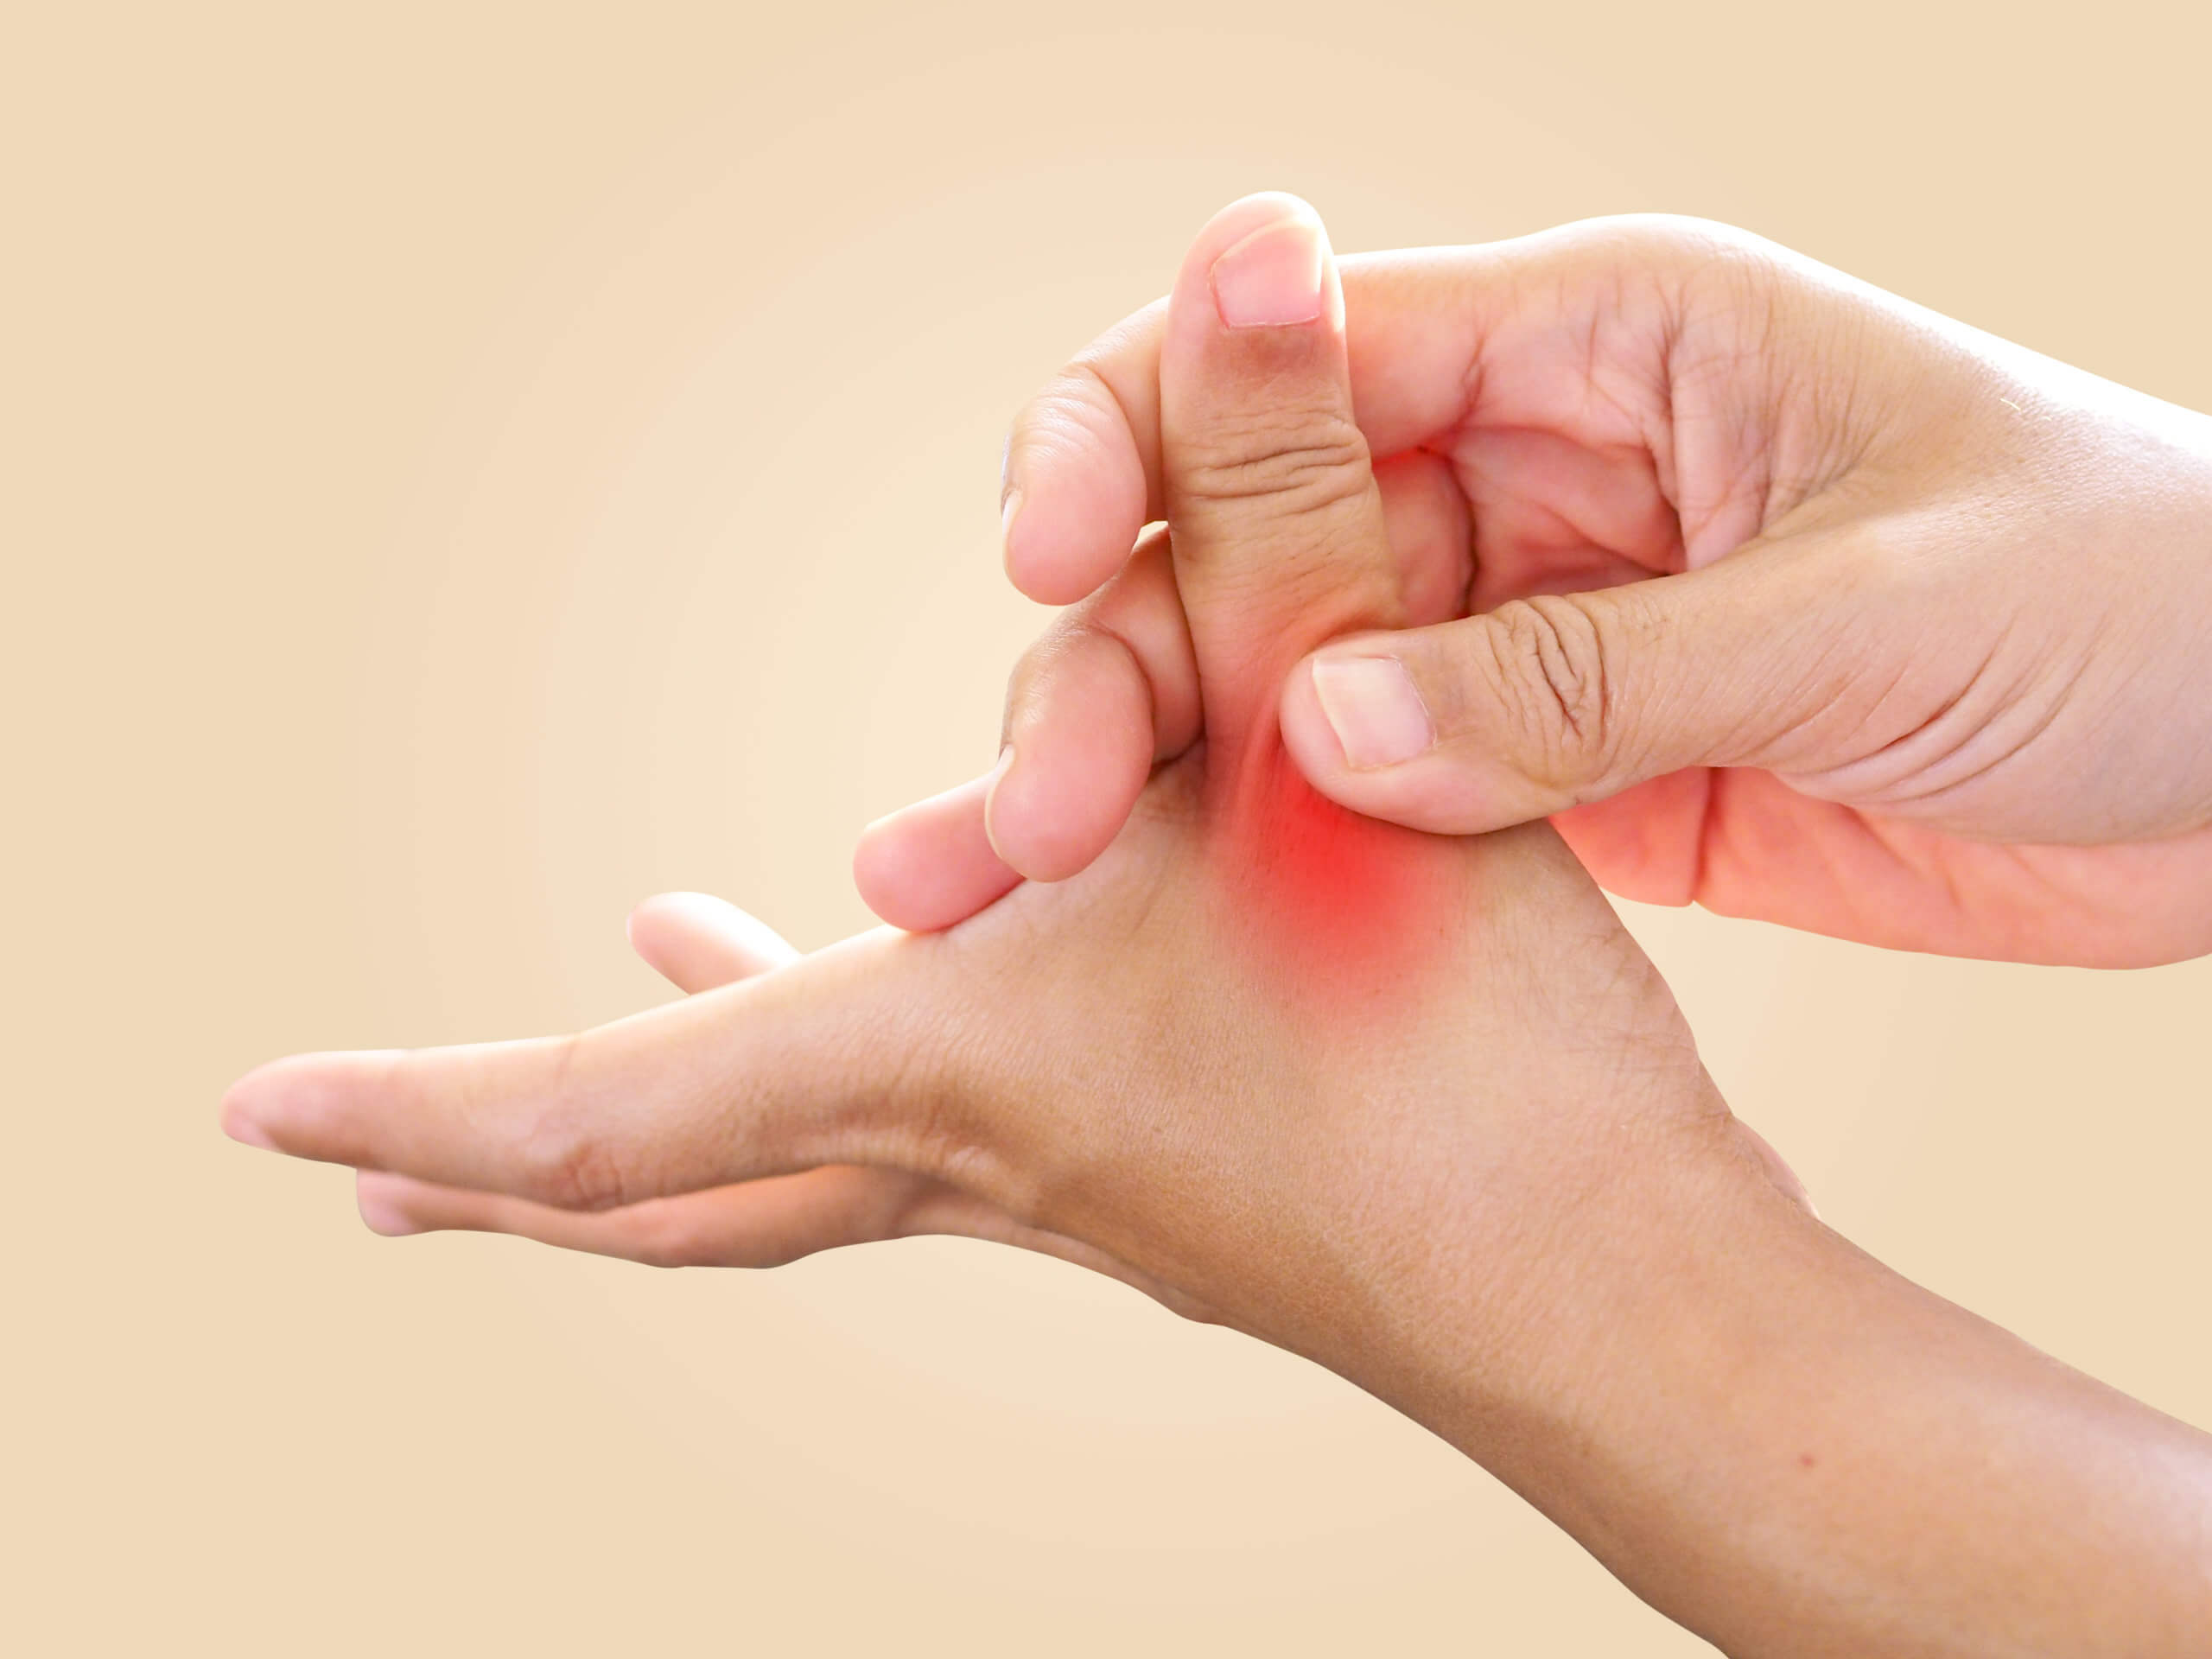 An image of two hands shows one rubbing the thumb of the other with a hot spot indicating pain. 